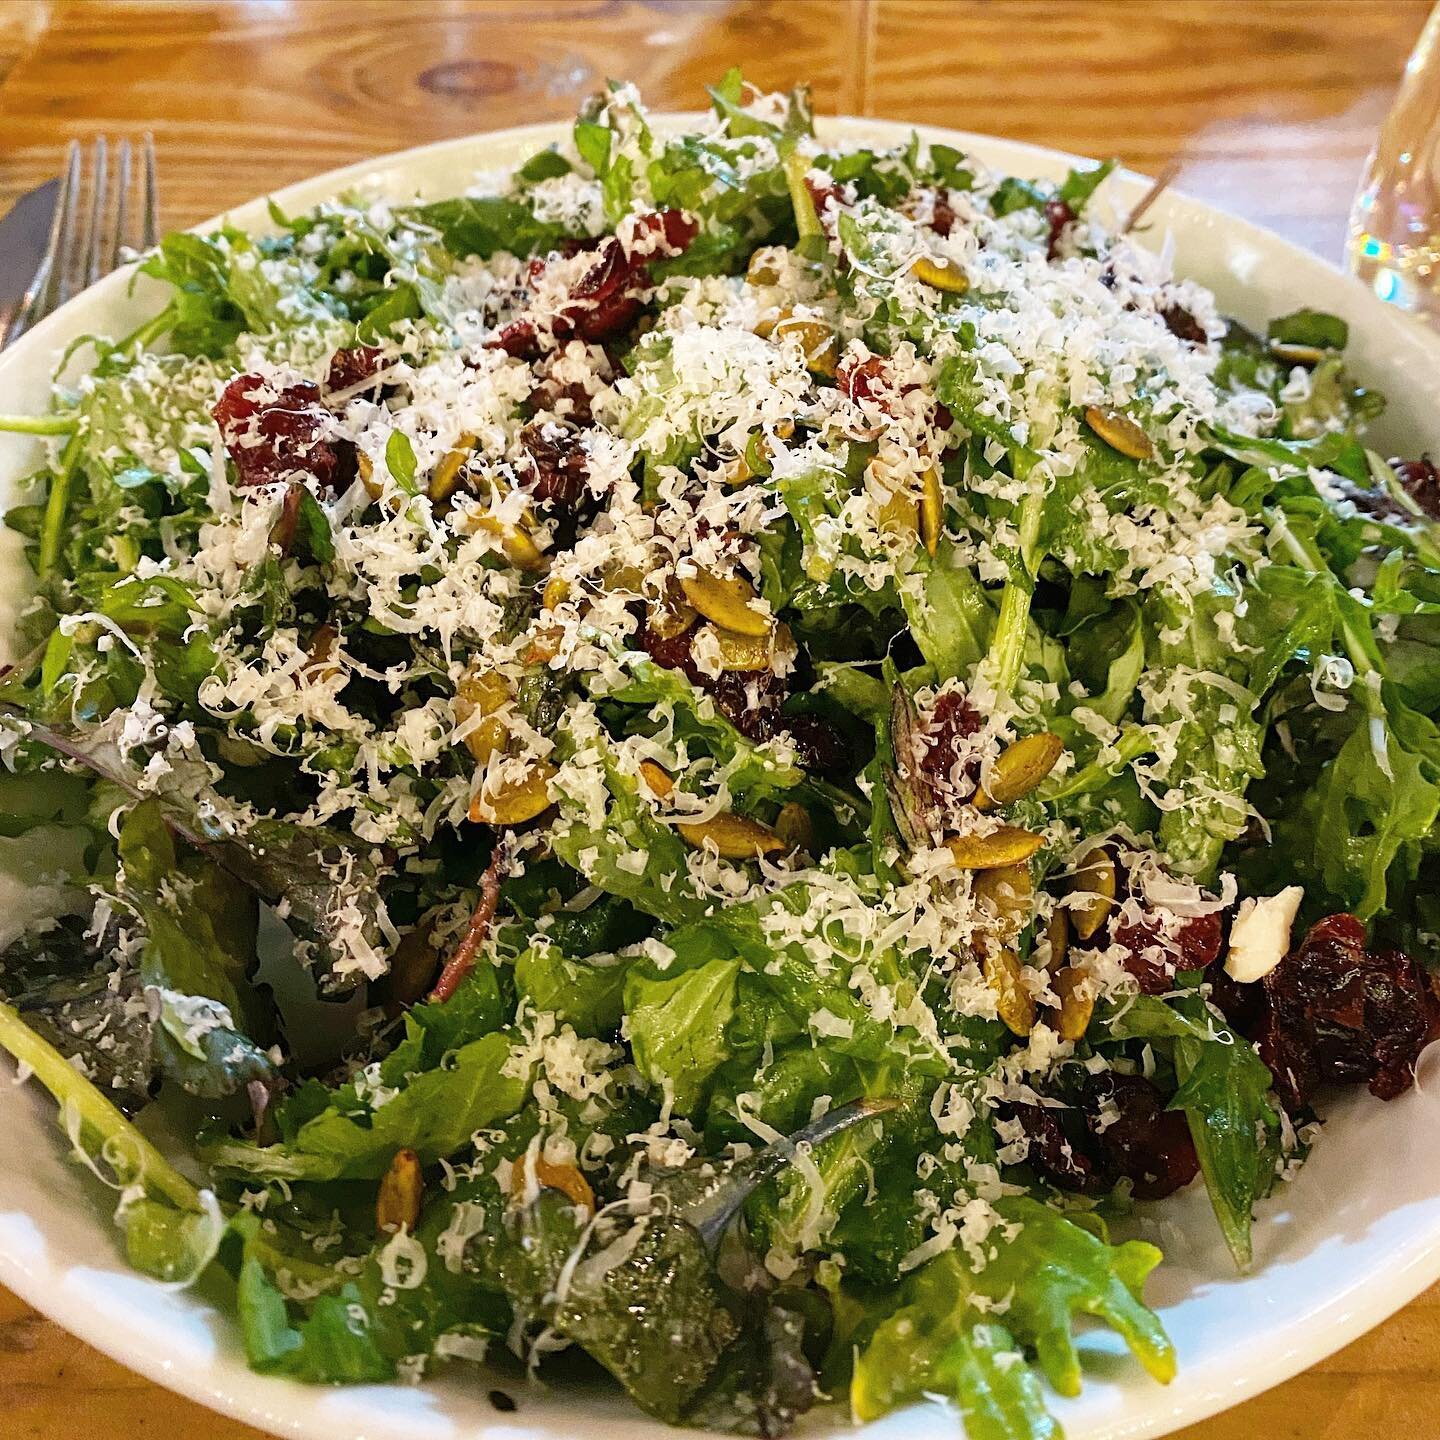 Baby Kale Salad made with baby kale, spiced pumpkin seeds, midnight moon cheese, dried cranberries &amp; apple vinaigrette 🙌. Available for patio dine in, curbside pick up &amp; free delivery!